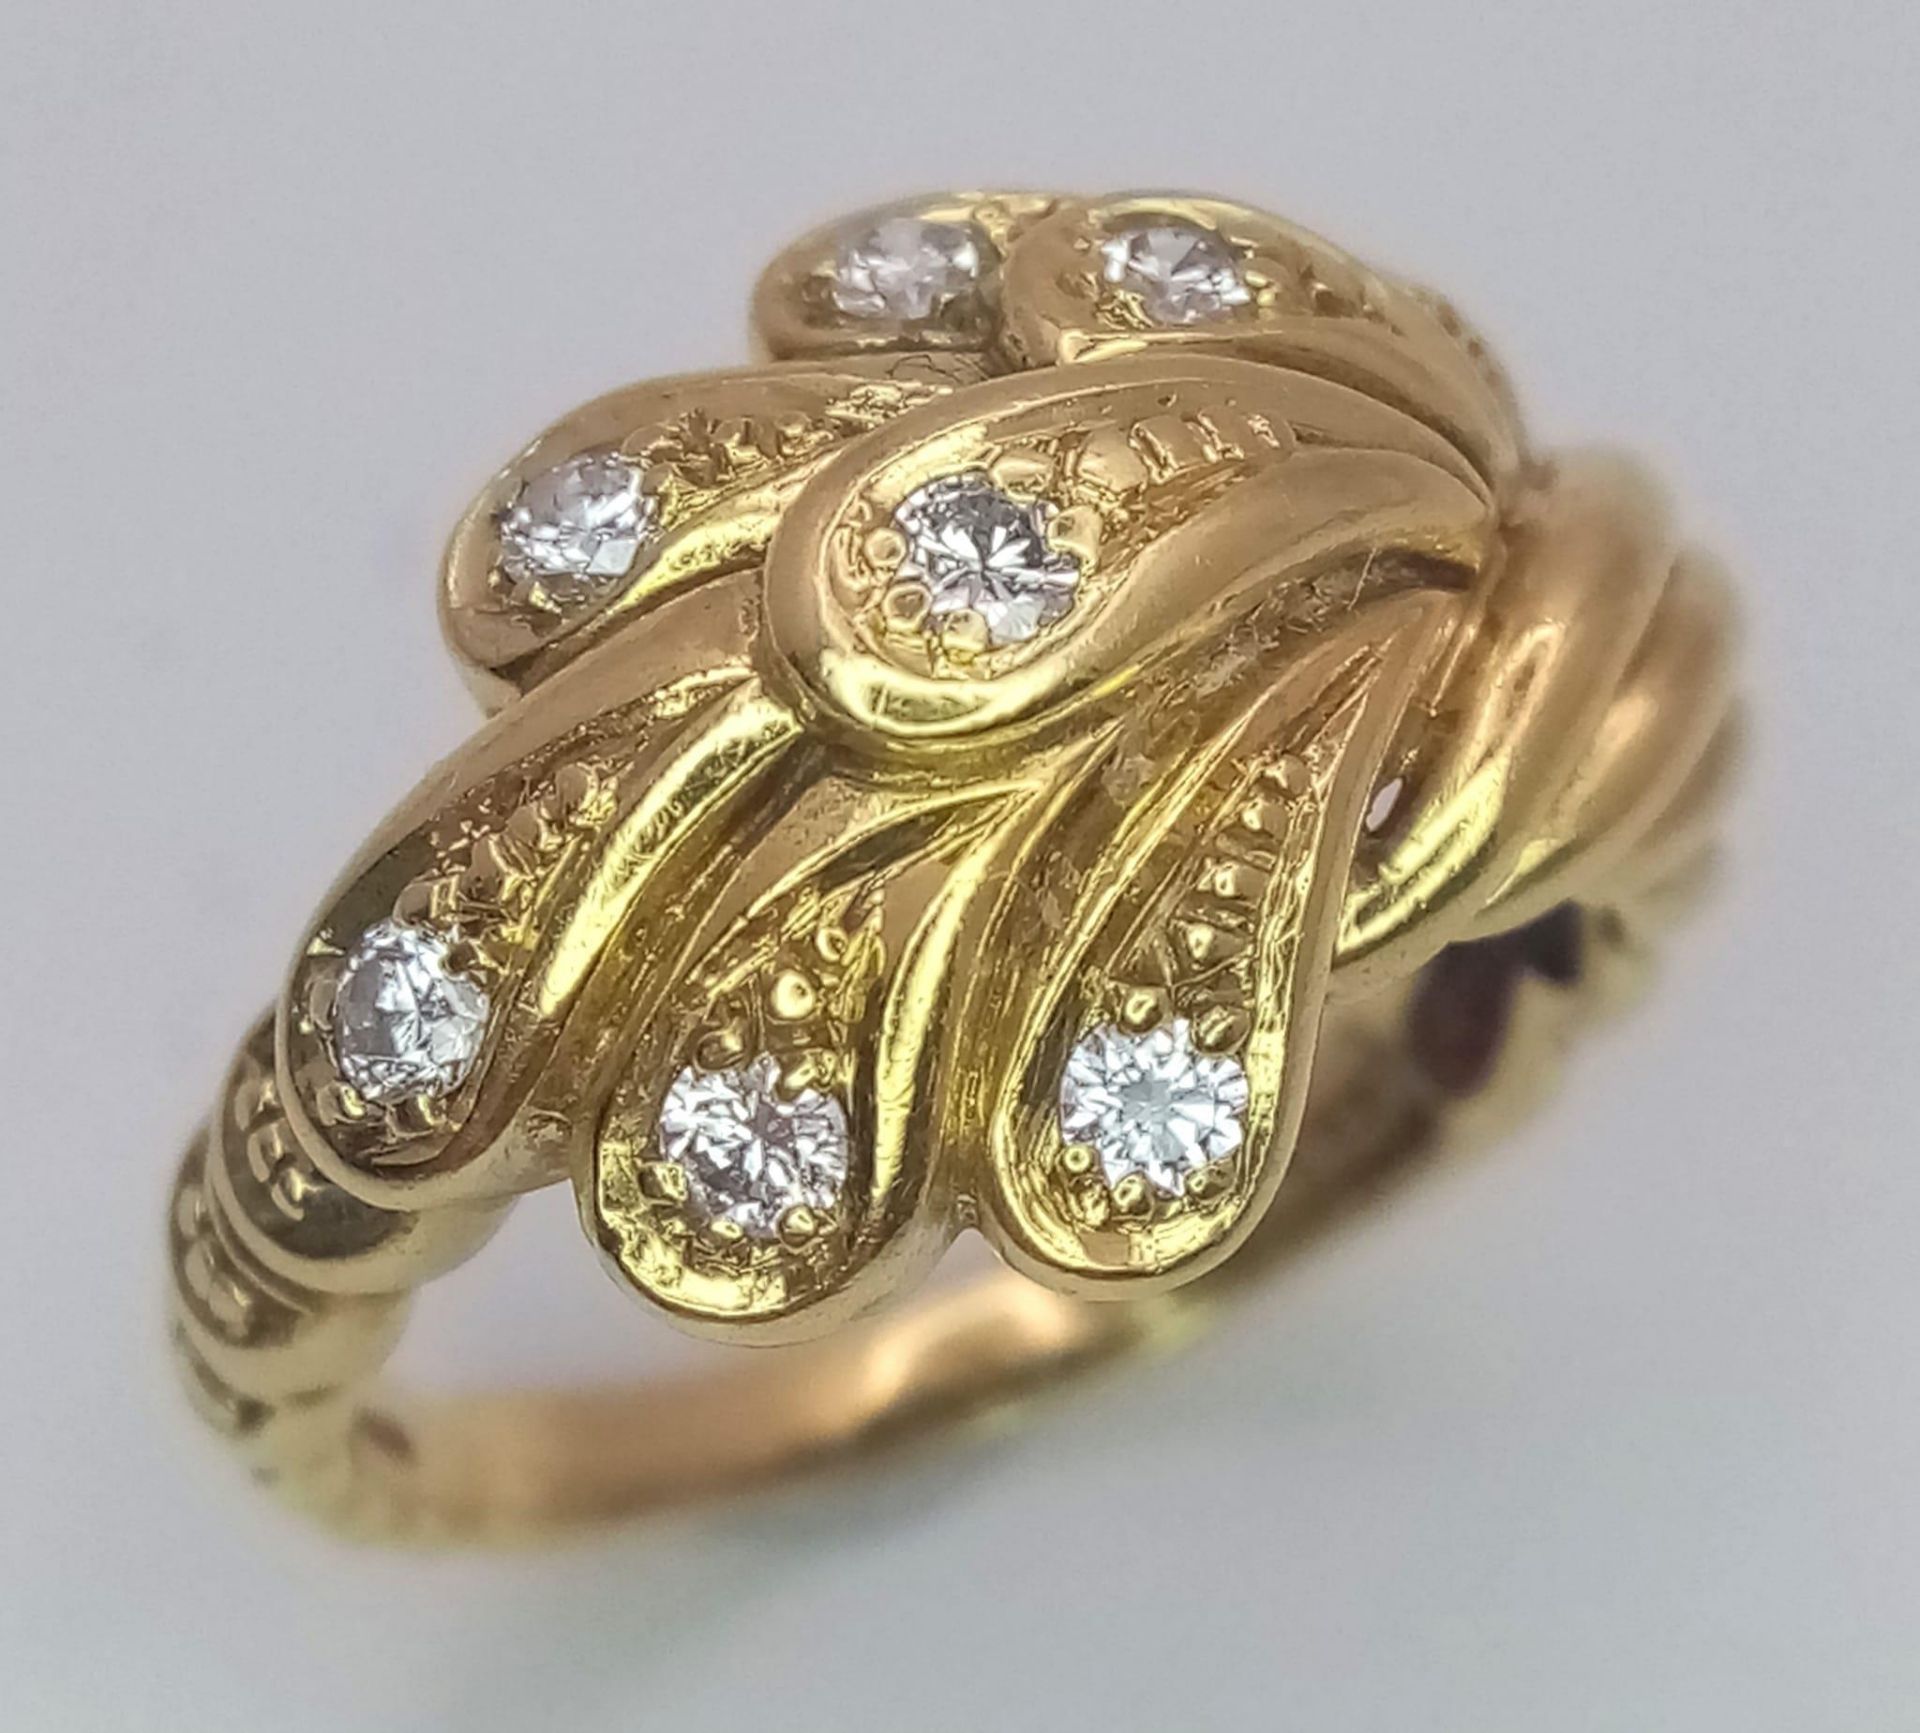 An 18 K yellow gold ring with an unusual design and eight good quality round cut diamonds. Size: